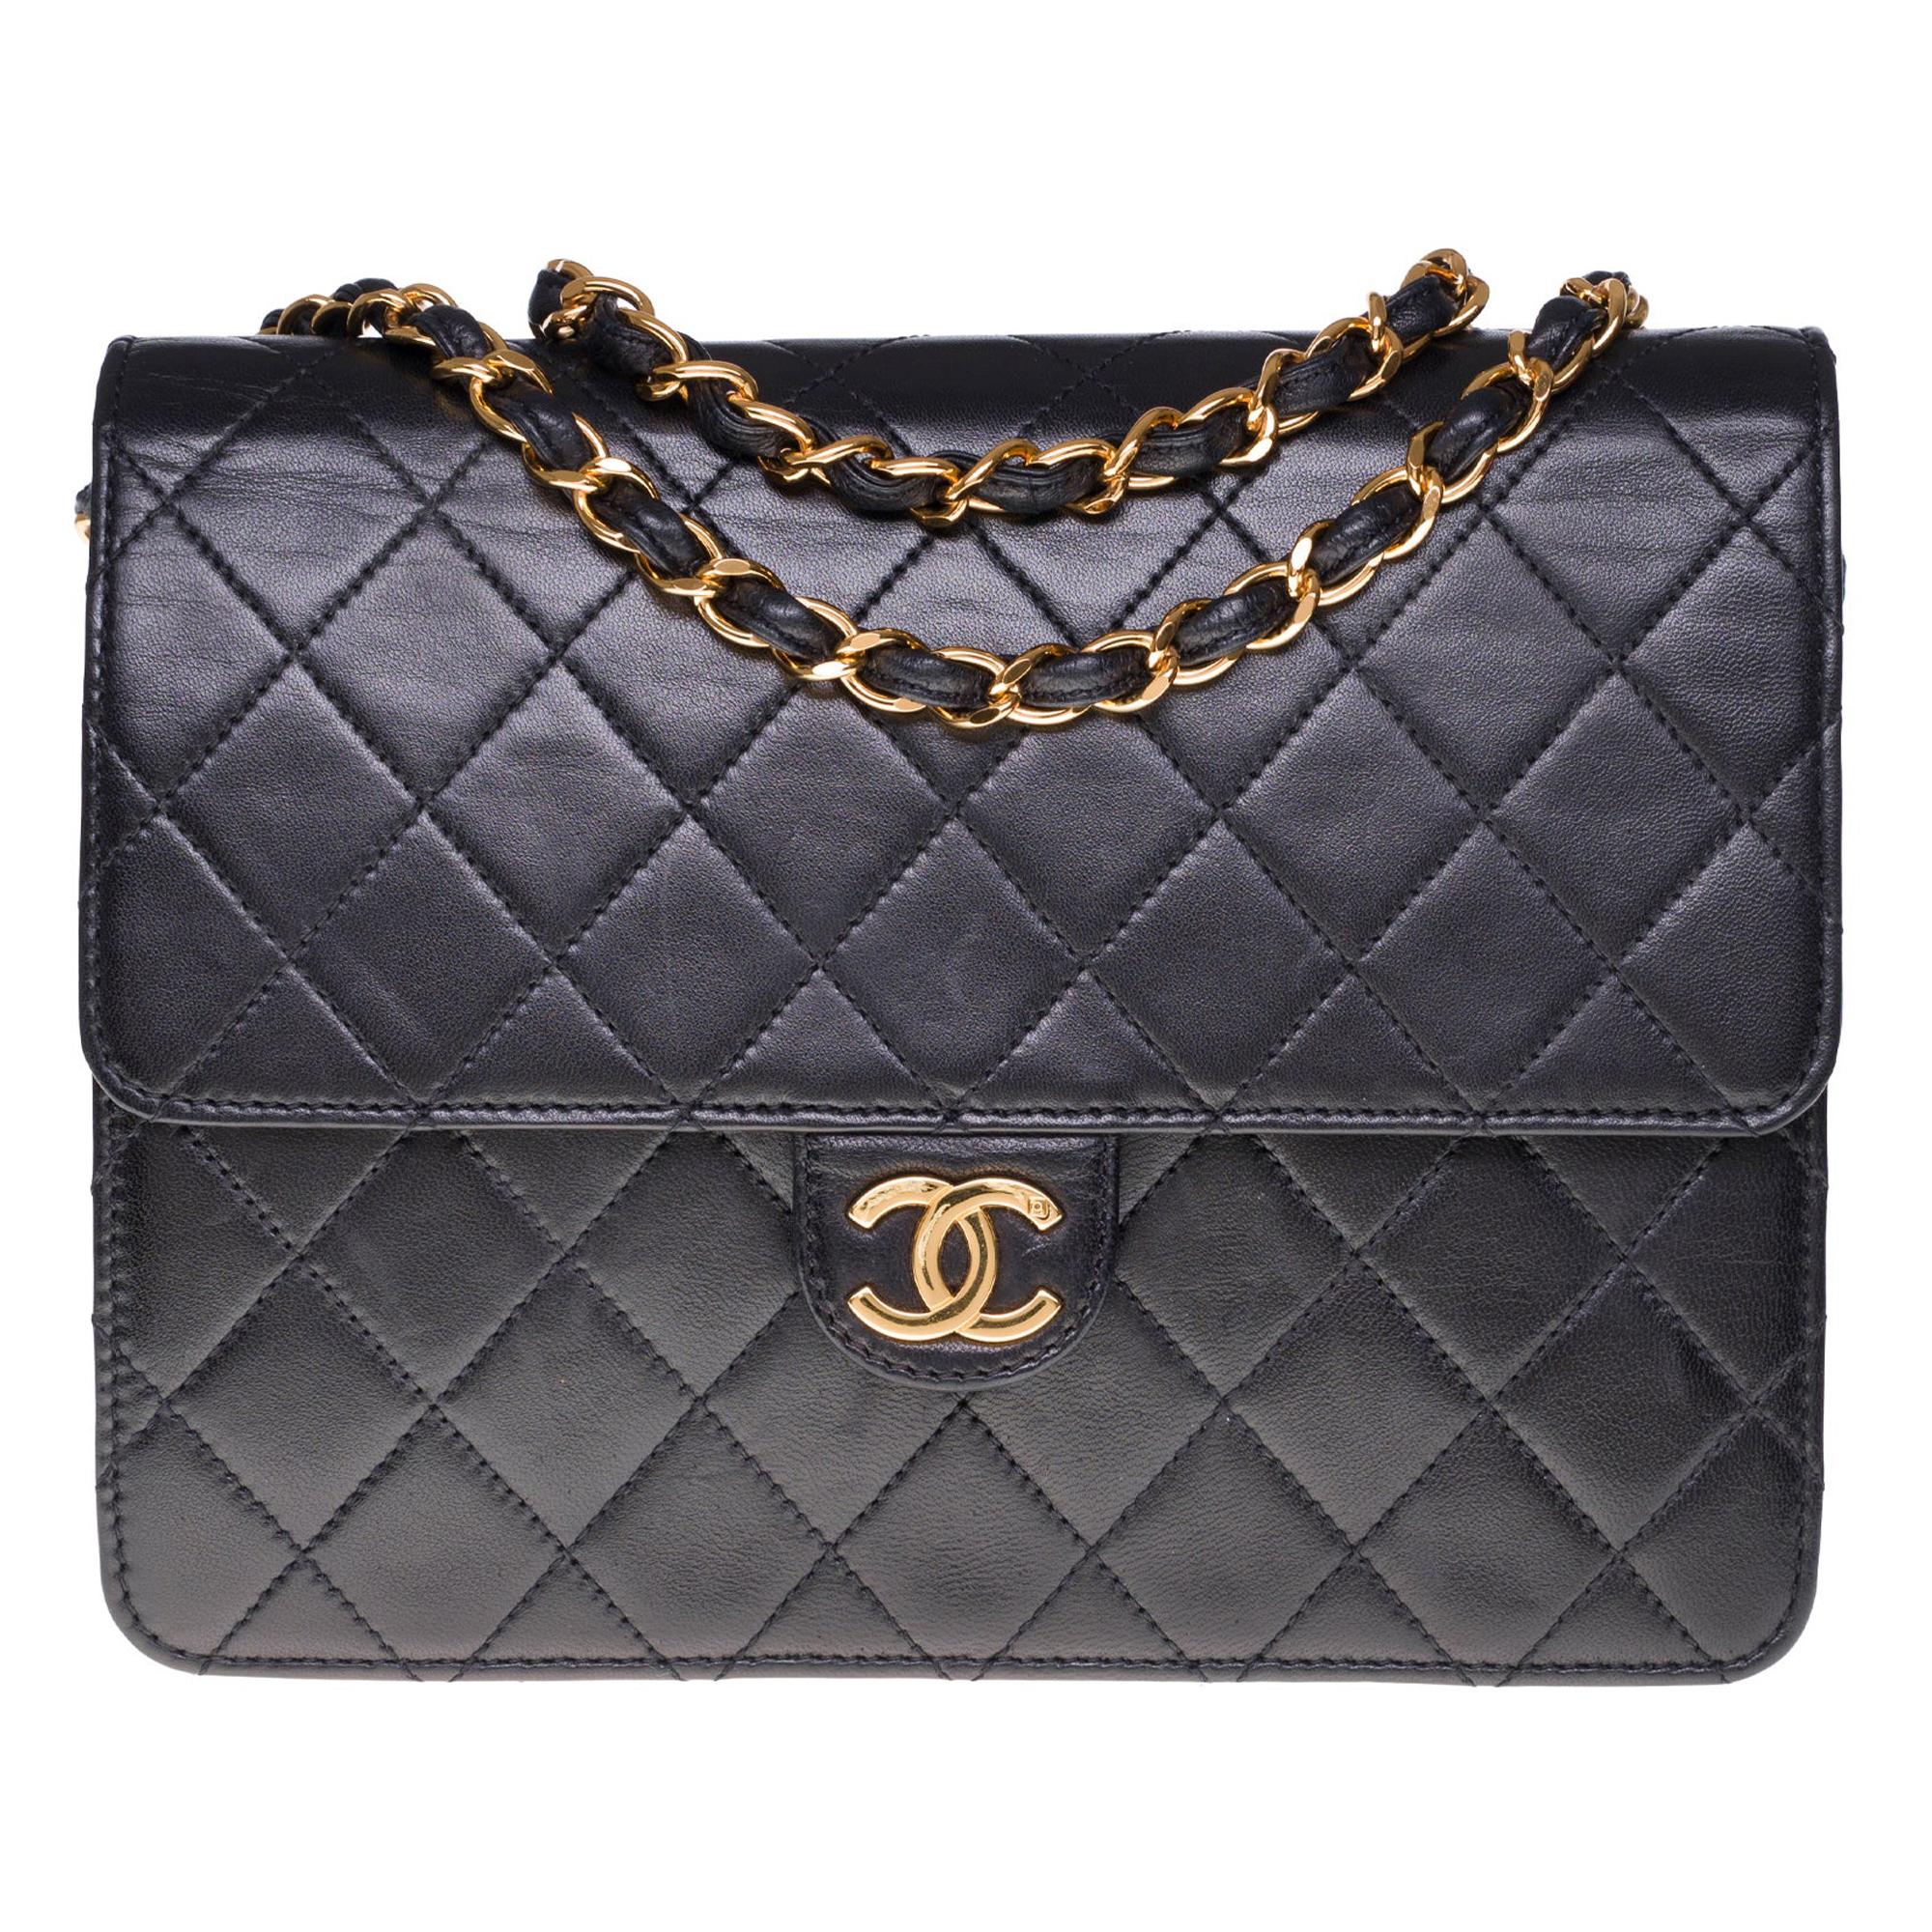 Chanel Classic 22cm shoulder bag in Black quilted lambskin and gold hardware